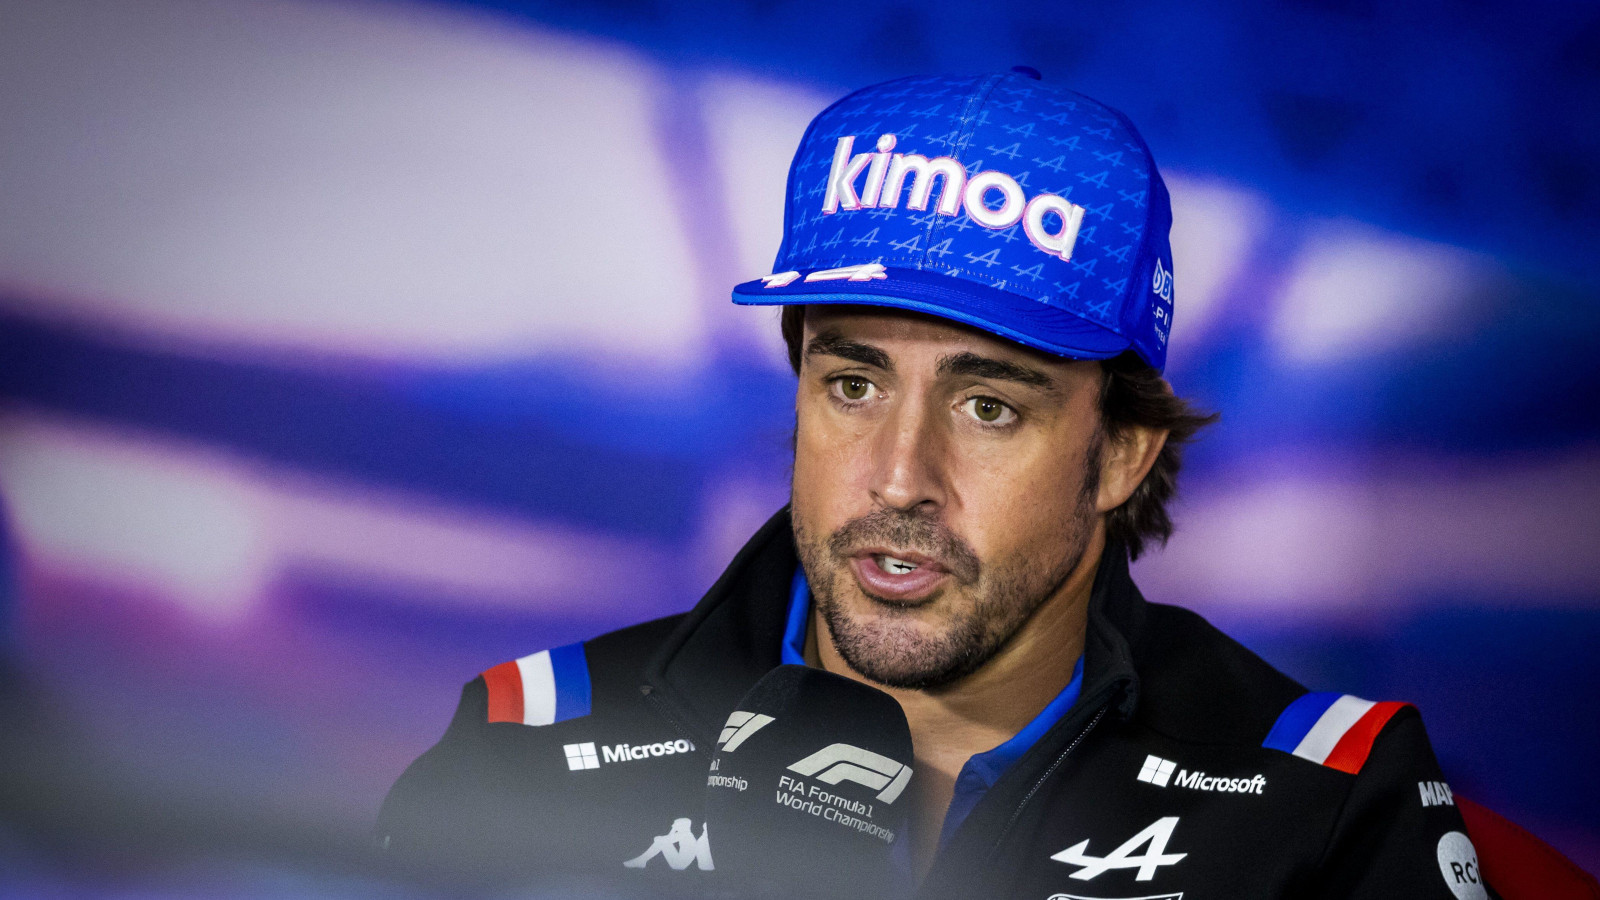 Fernando Alonso speaking during a press conference at the Silverstone circuit. Britain July 2022